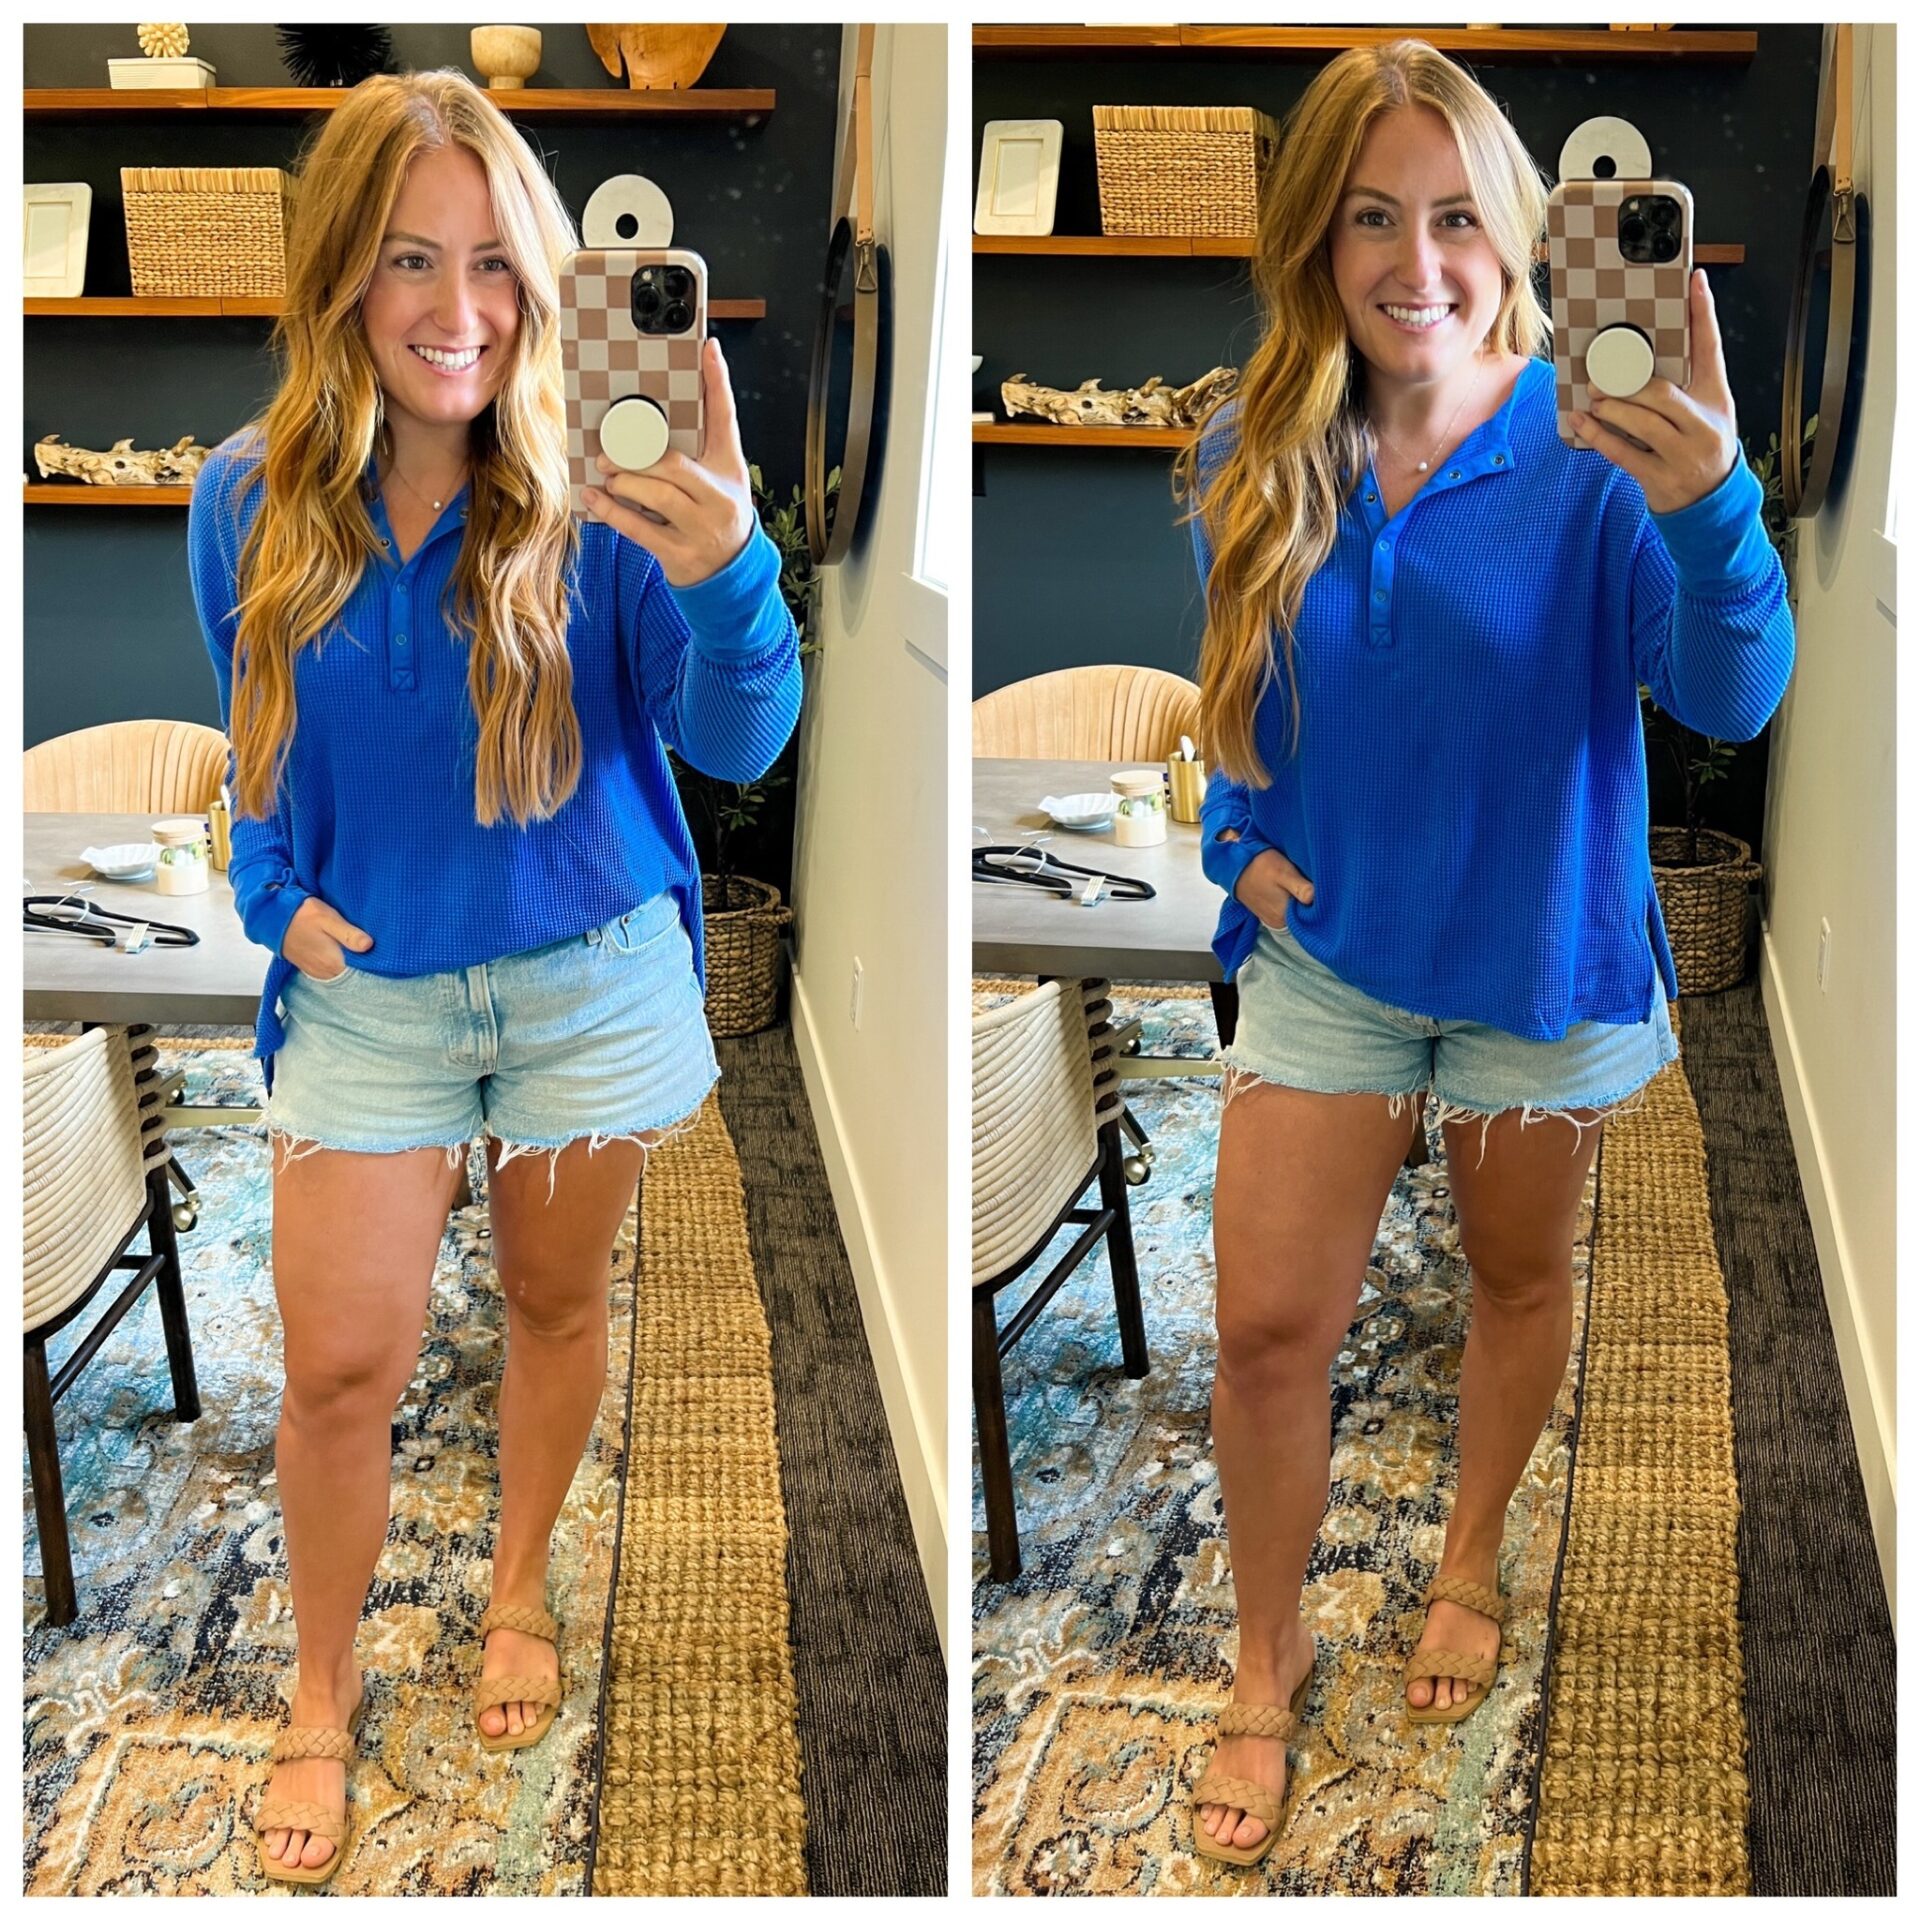 The Aerie Shorts Styled 5 Ways - Living in Yellow